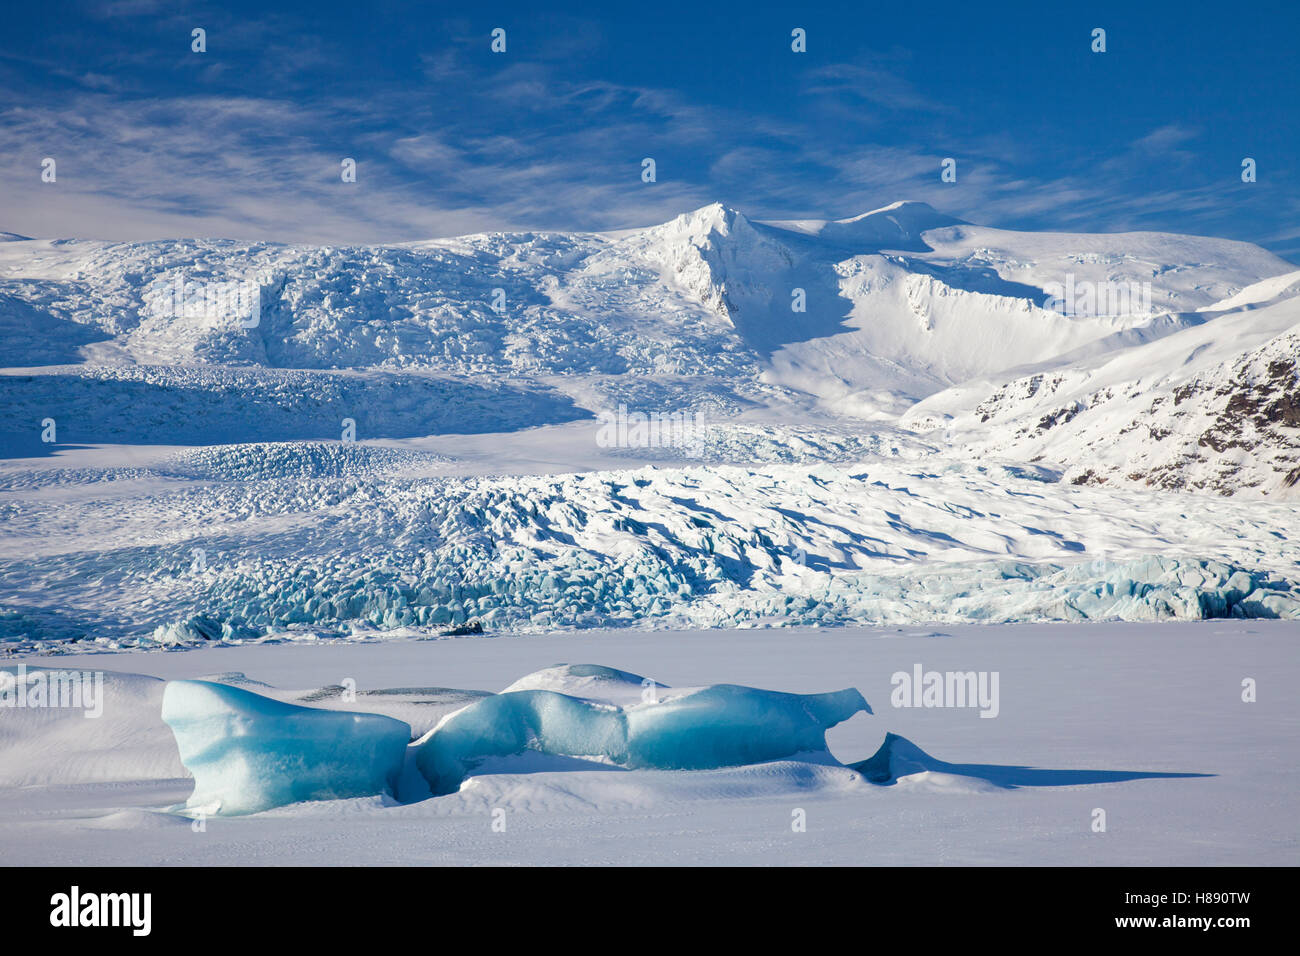 Ice formations in the Fjallsárlón Glacier Lagoon, glacial lake in winter, Iceland Stock Photo